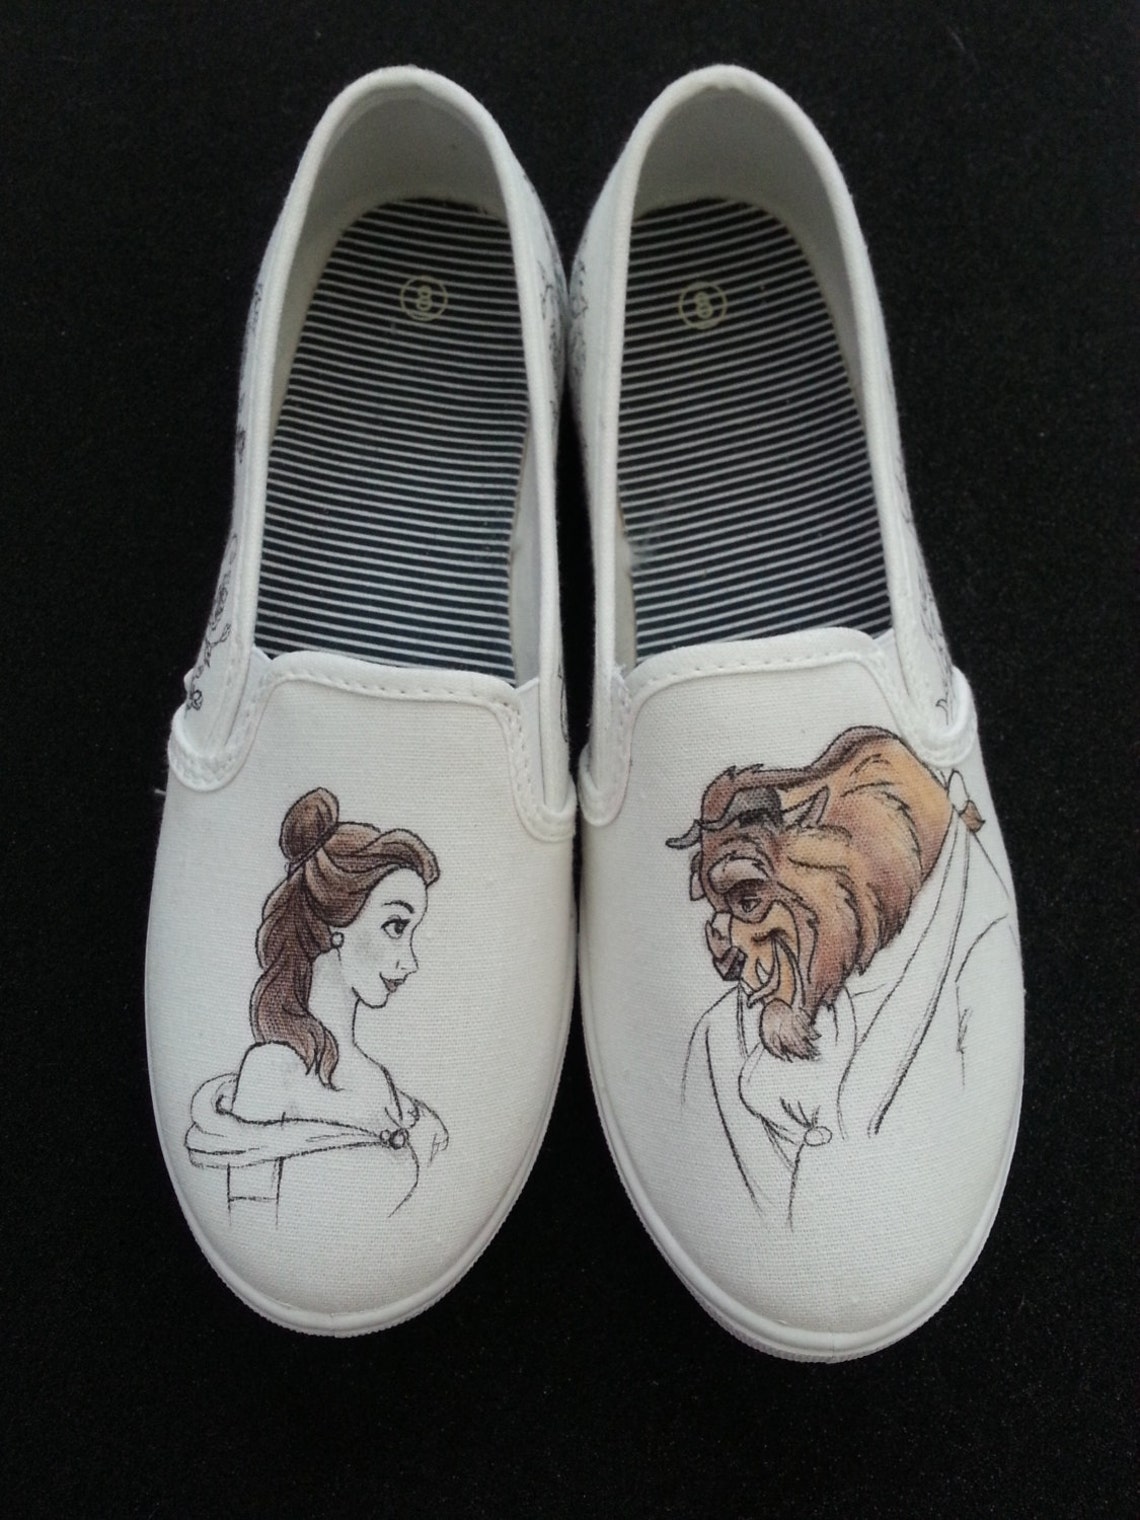 Disney's Beauty and the Beast Themed Shoes With Wraparound - Etsy